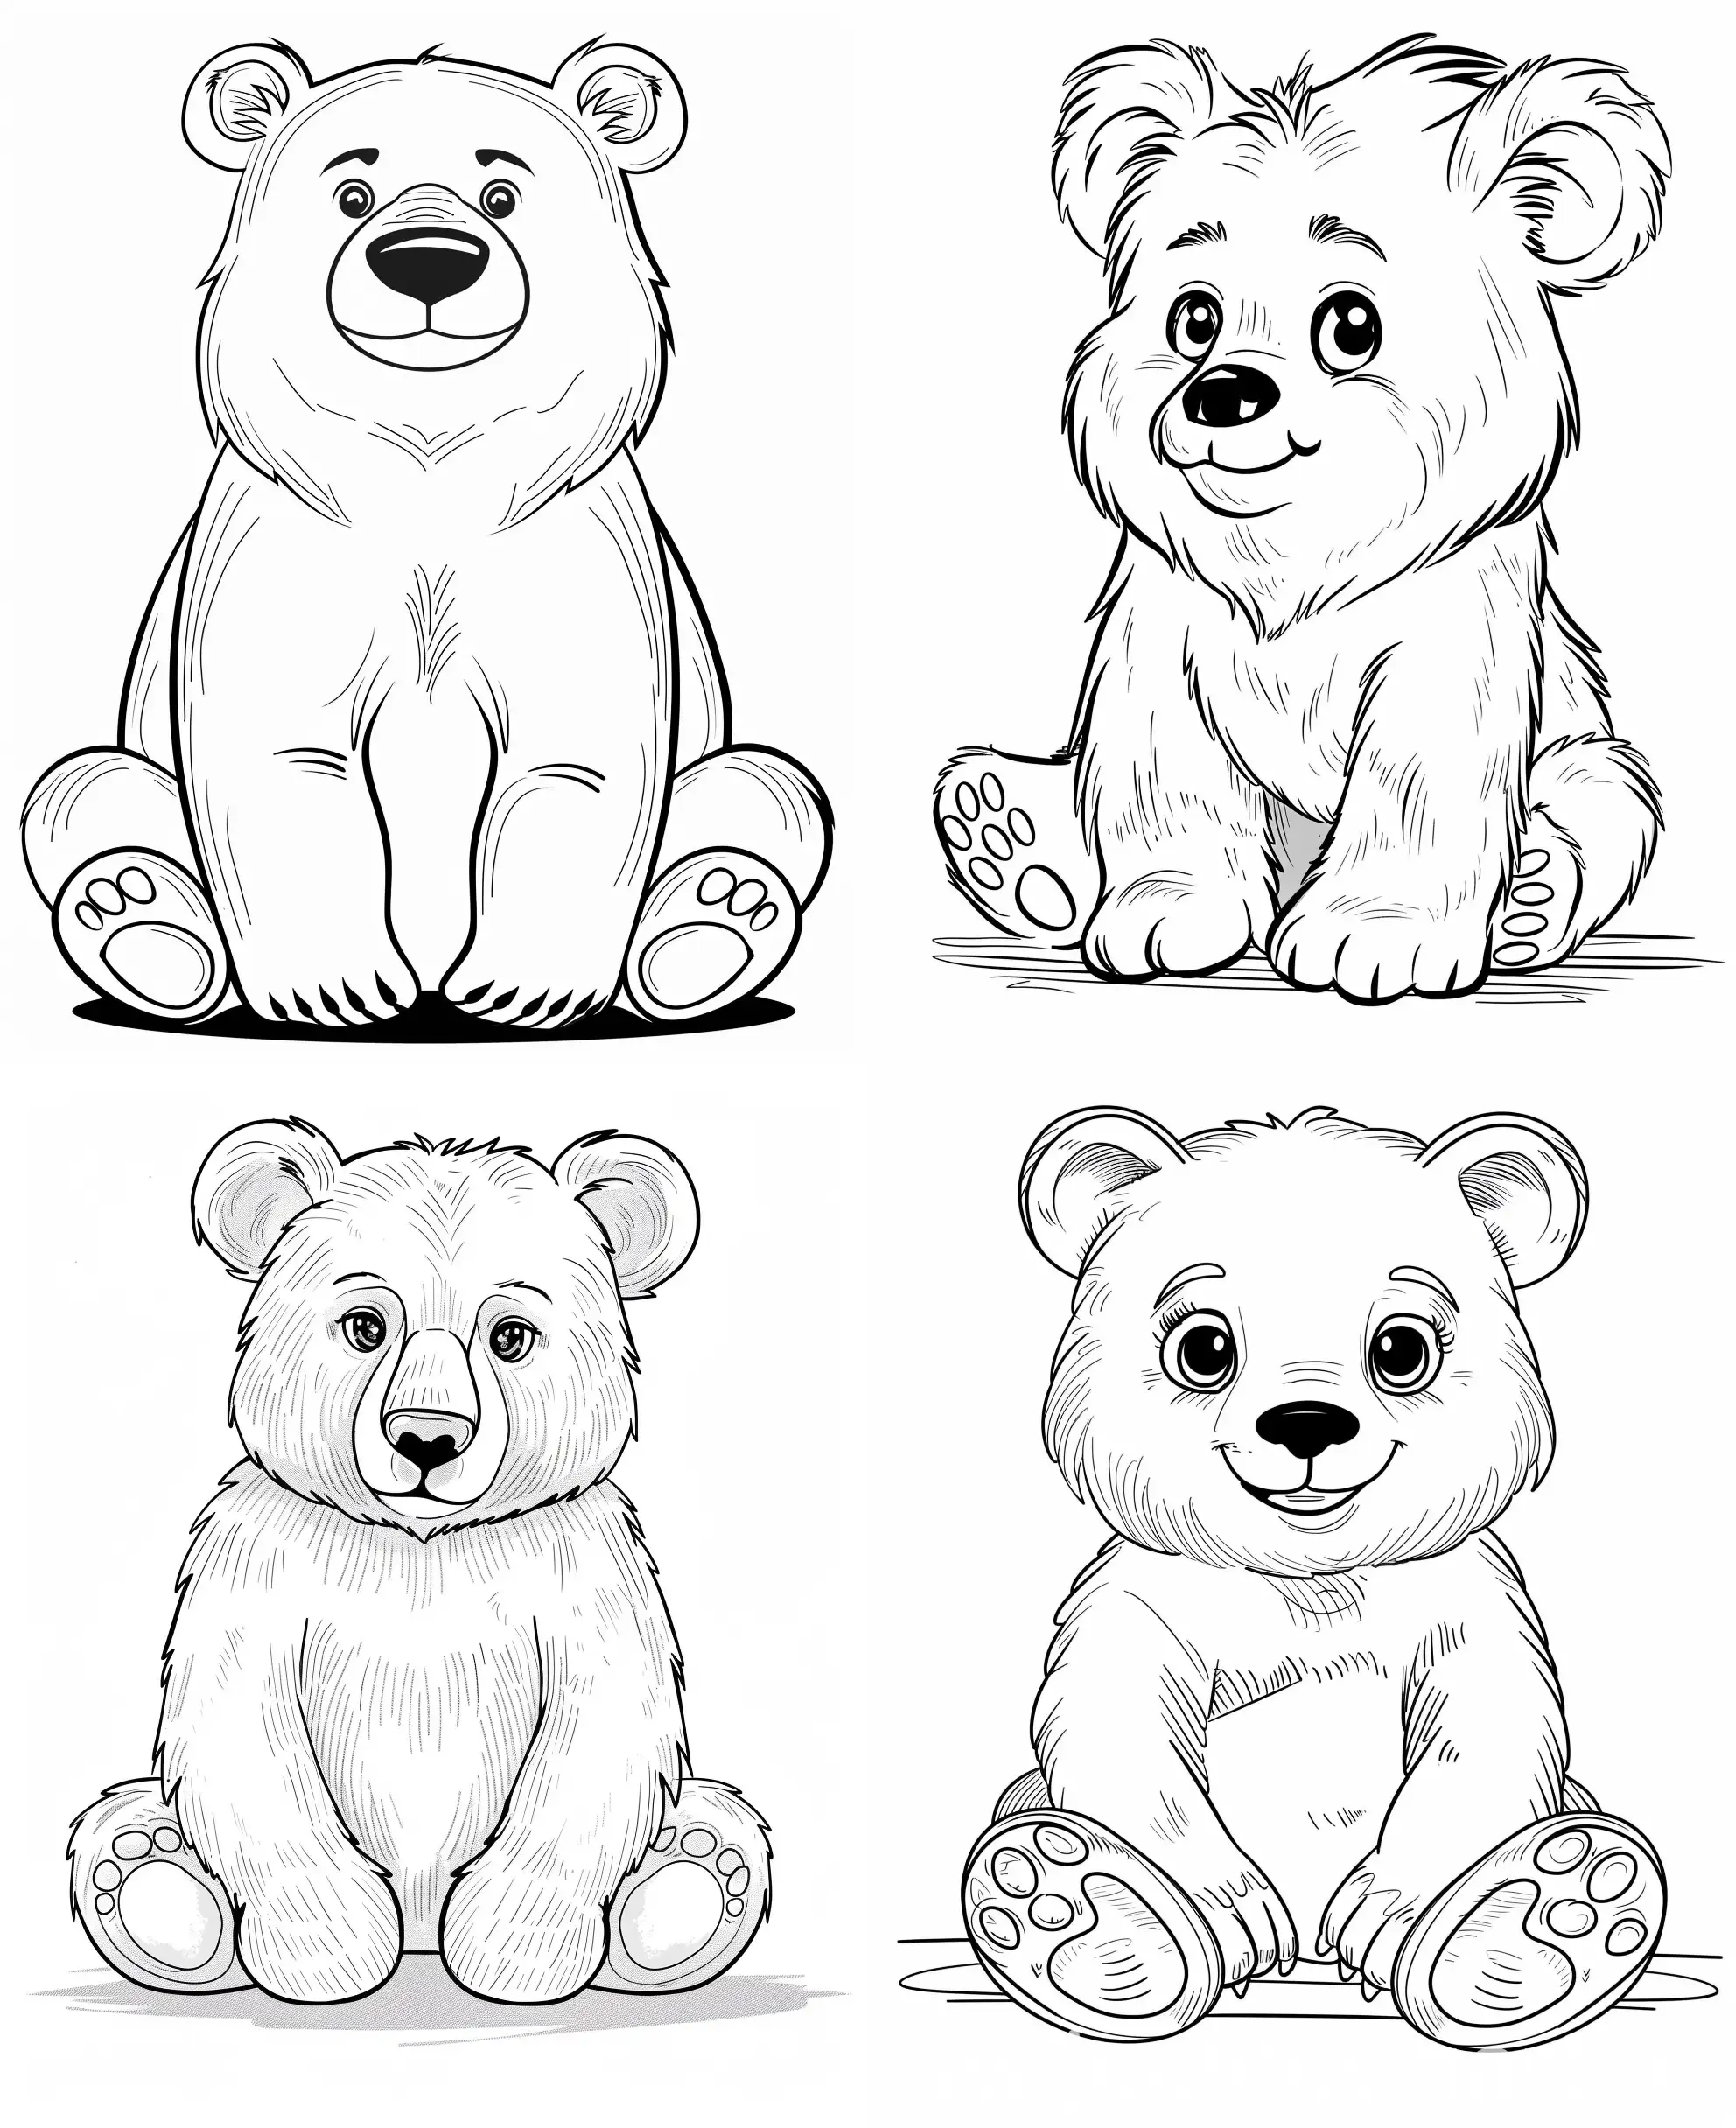 Coloring page of a cute Bear, use clean lines and leave plenty of white space for coloring, simple line art, one line art, clean and minimalistic line, --ar 9:11 